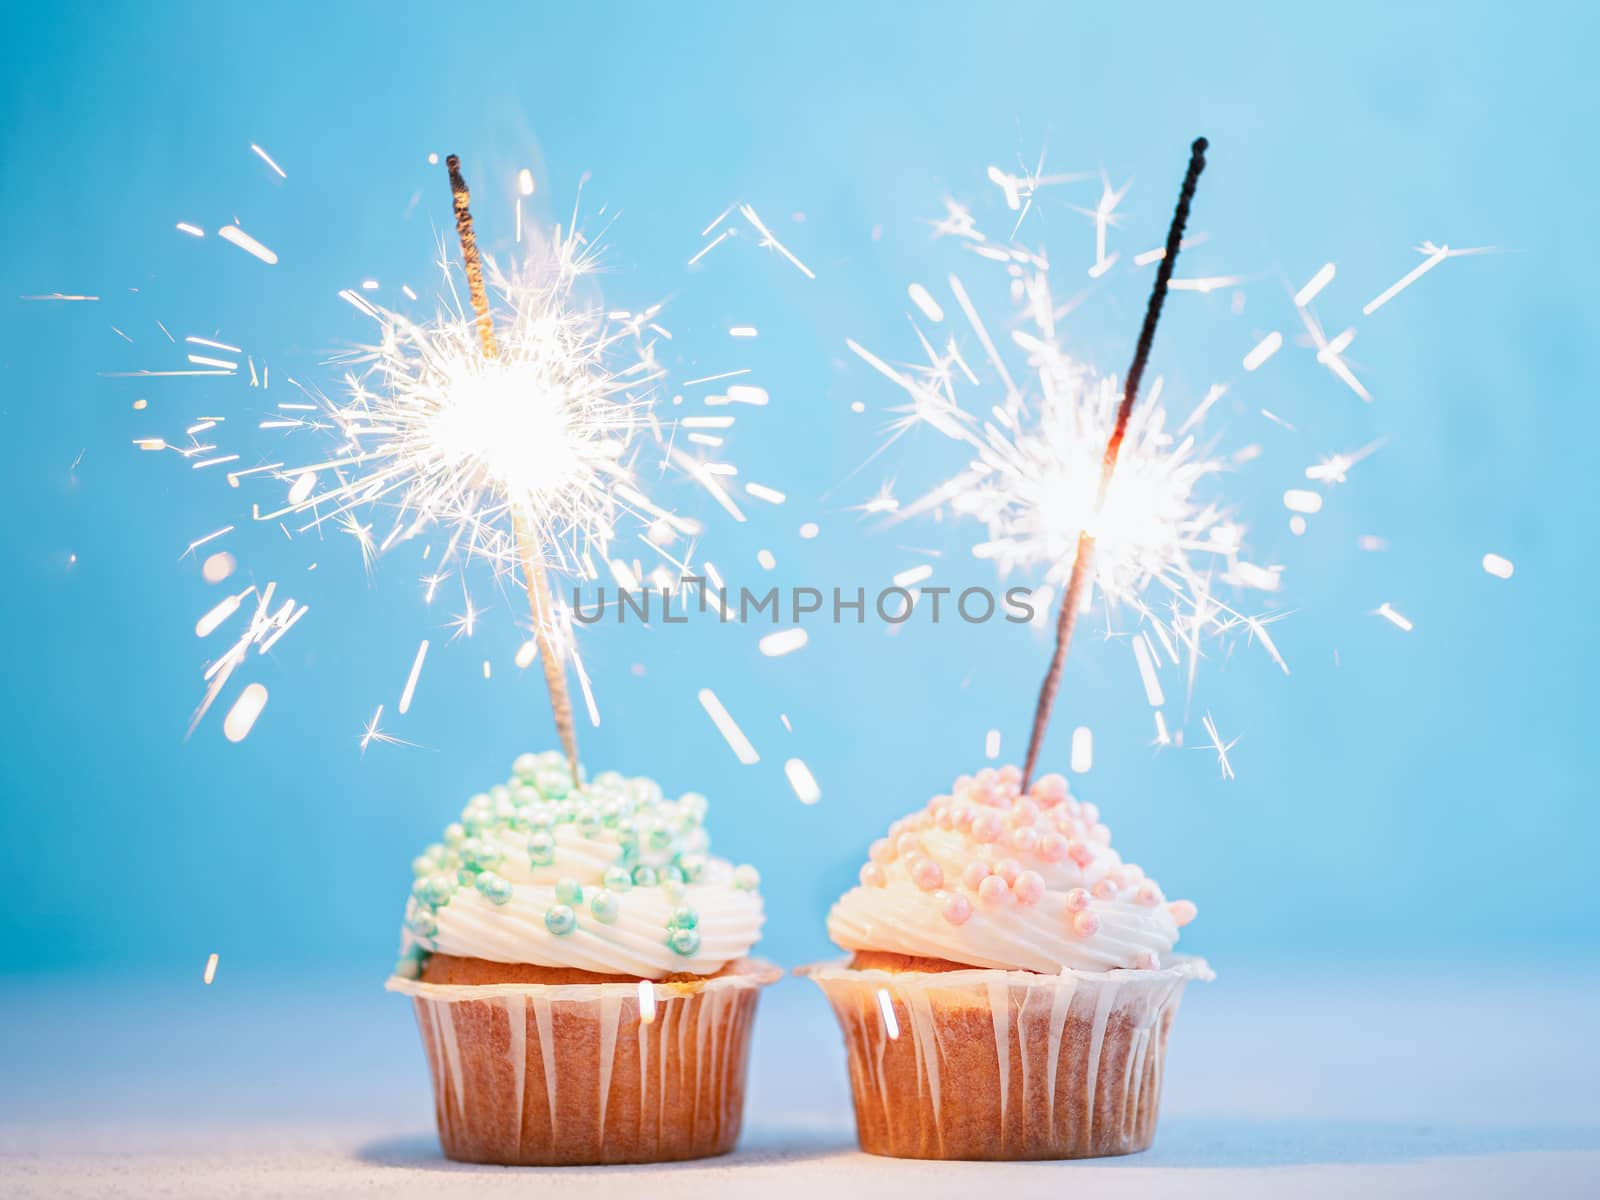 Two cupcakes decorated with colorful sprinkles and sparklers. Festive cupcakes with blue and pink sprinkles on blue background